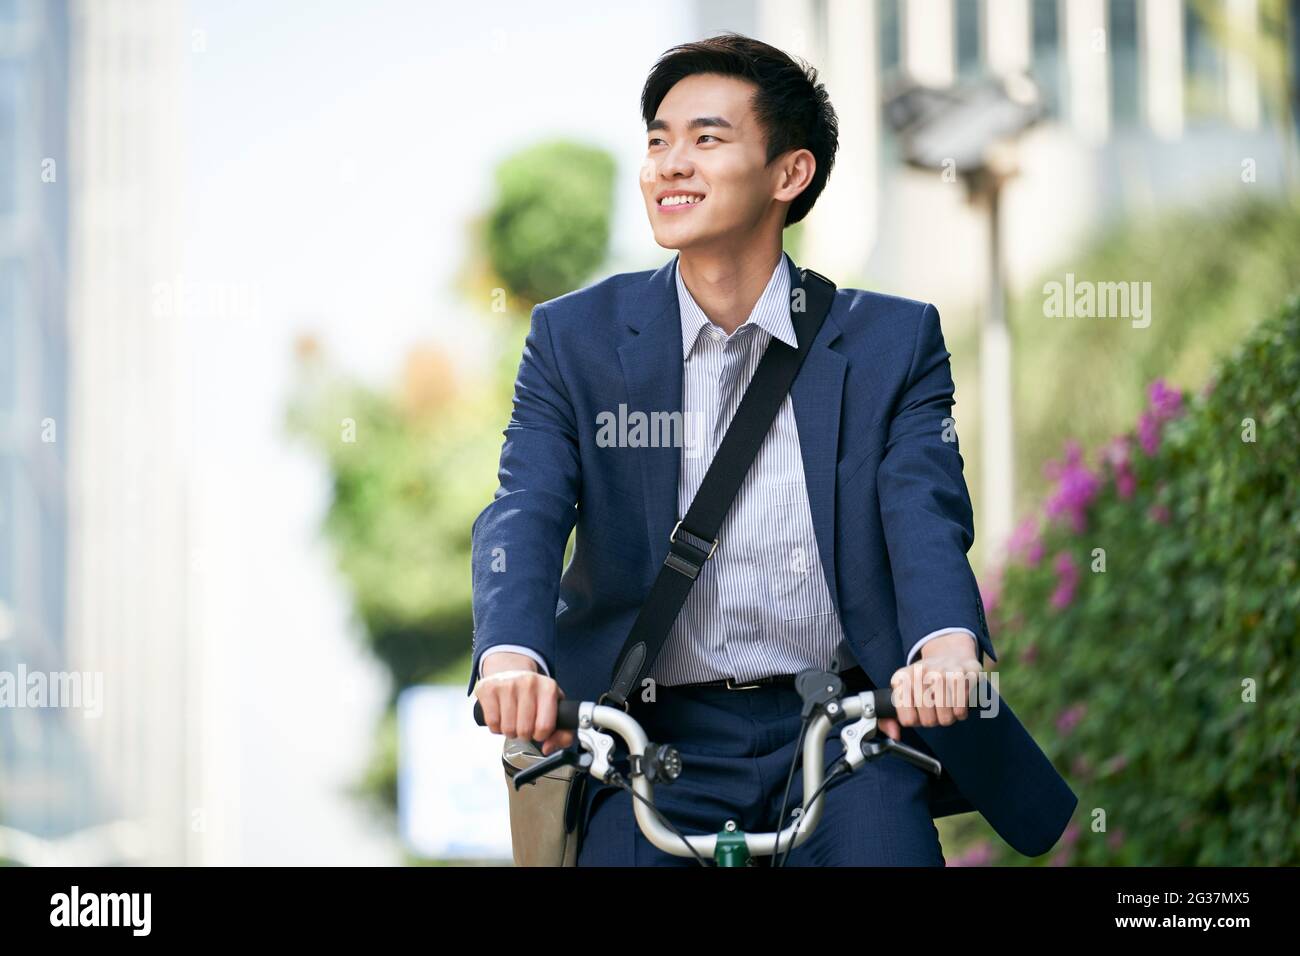 young asian businessman commuting by bike happy and smiling Stock Photo